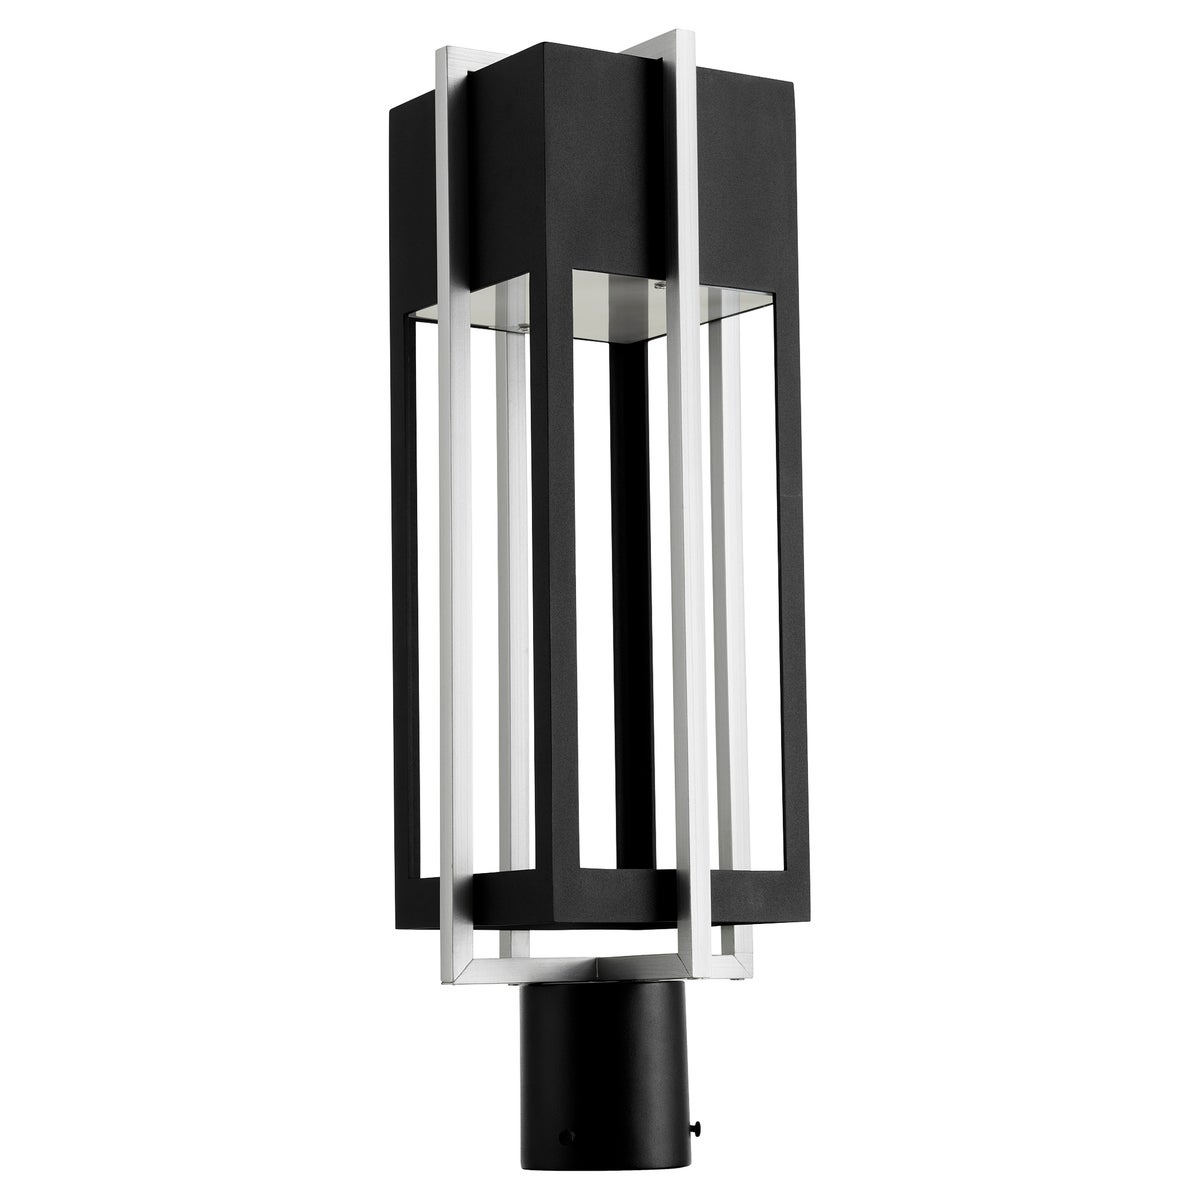 LED Outdoor Post Light with a unique geometric design, featuring a dual-layered frame in a two-toned noir/satin nickel finish. Provides guiding light for guests in contemporary outdoor settings. 7&quot;W x 21.63&quot;H. 11W LED, 465 lumens, 3000K color temperature. UL Listed for wet locations. 2-year warranty.